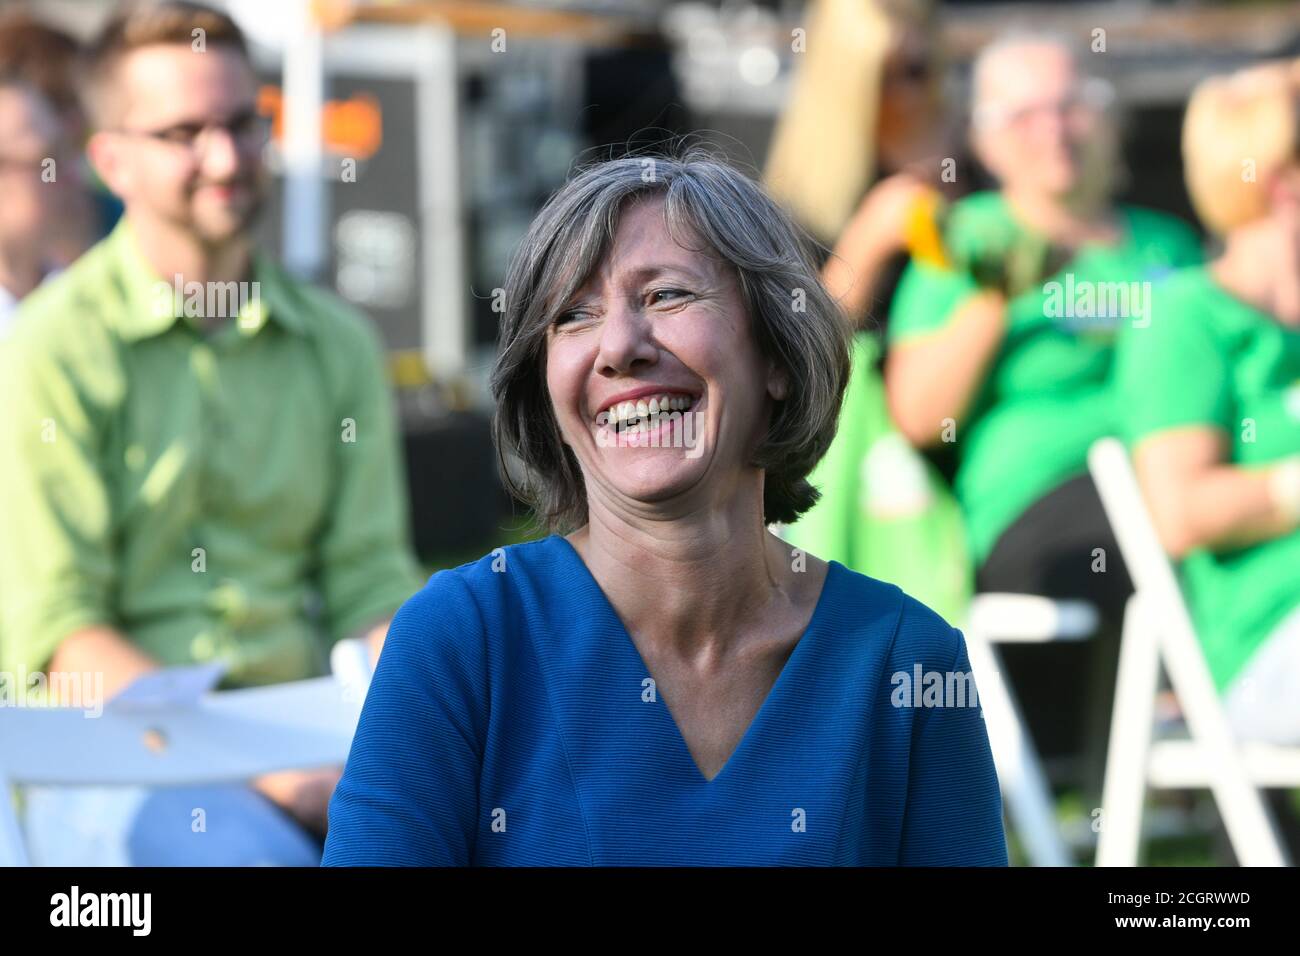 Vienna, Austria. 12th Sep, 2020. Green (Green Party Austria) Vienna's election campaign for mayoral elections on October 11, 2020 in Sigmund Freud Park. Image shows Birgit Hebein, Vice Mayor of Vienna. Credit: Franz Perc / Alamy Live News Stock Photo